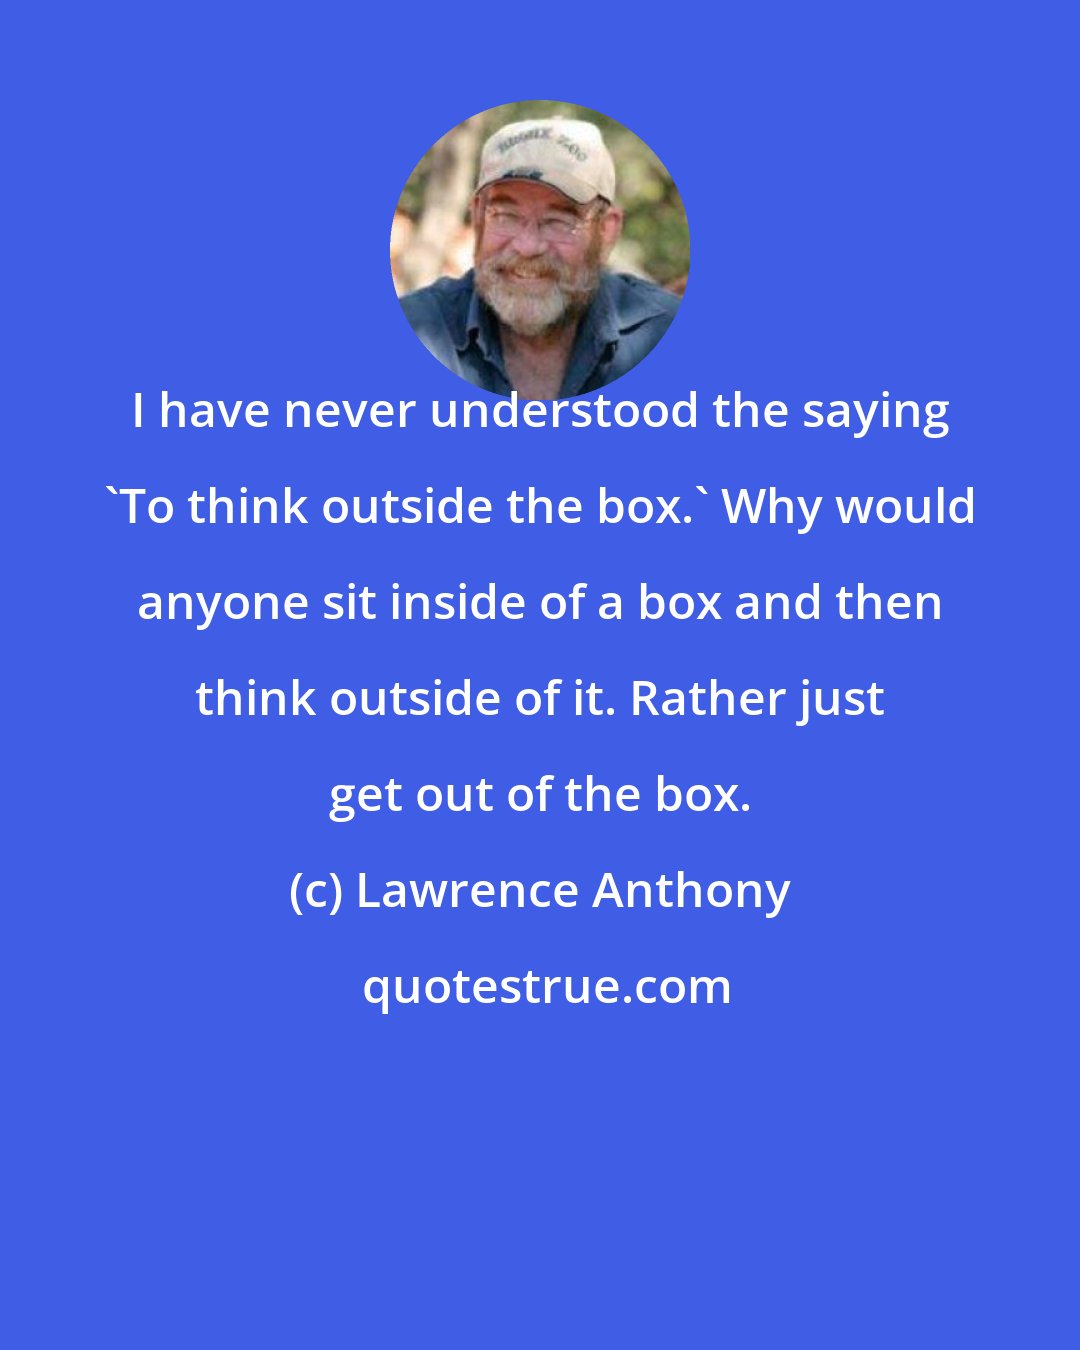 Lawrence Anthony: I have never understood the saying 'To think outside the box.' Why would anyone sit inside of a box and then think outside of it. Rather just get out of the box.